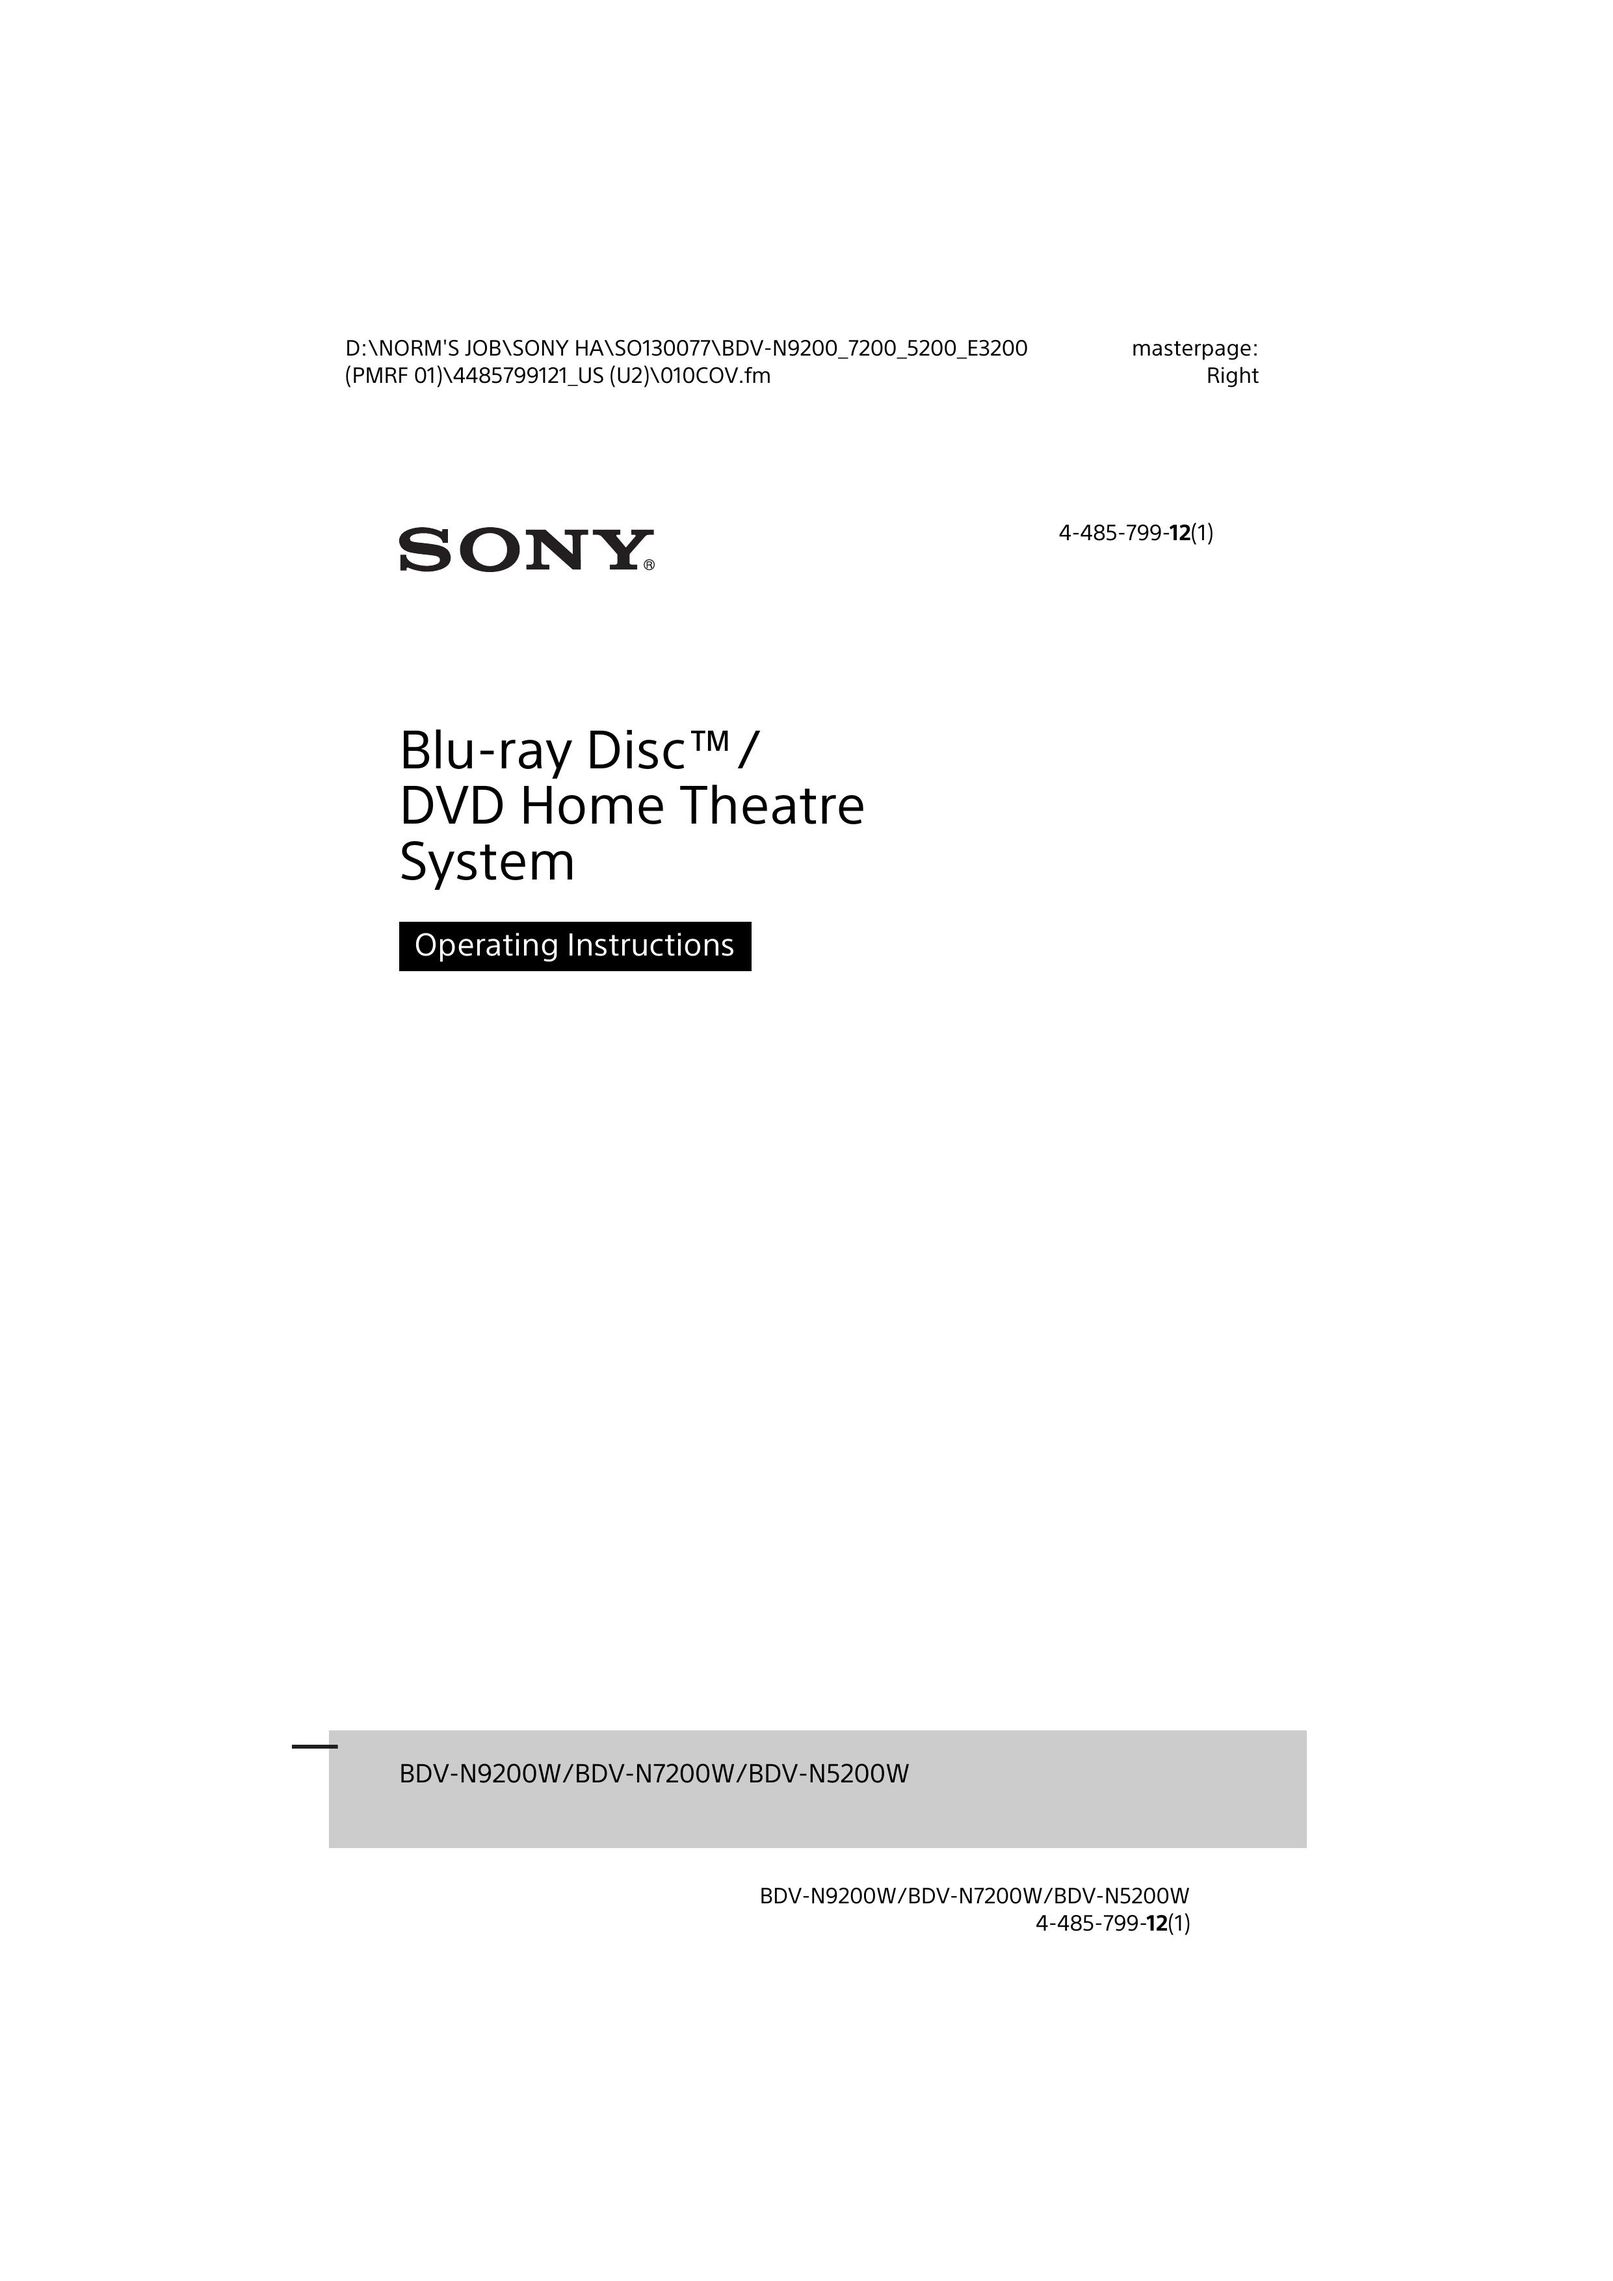 Sony BDV-N5200W Home Theater System User Manual